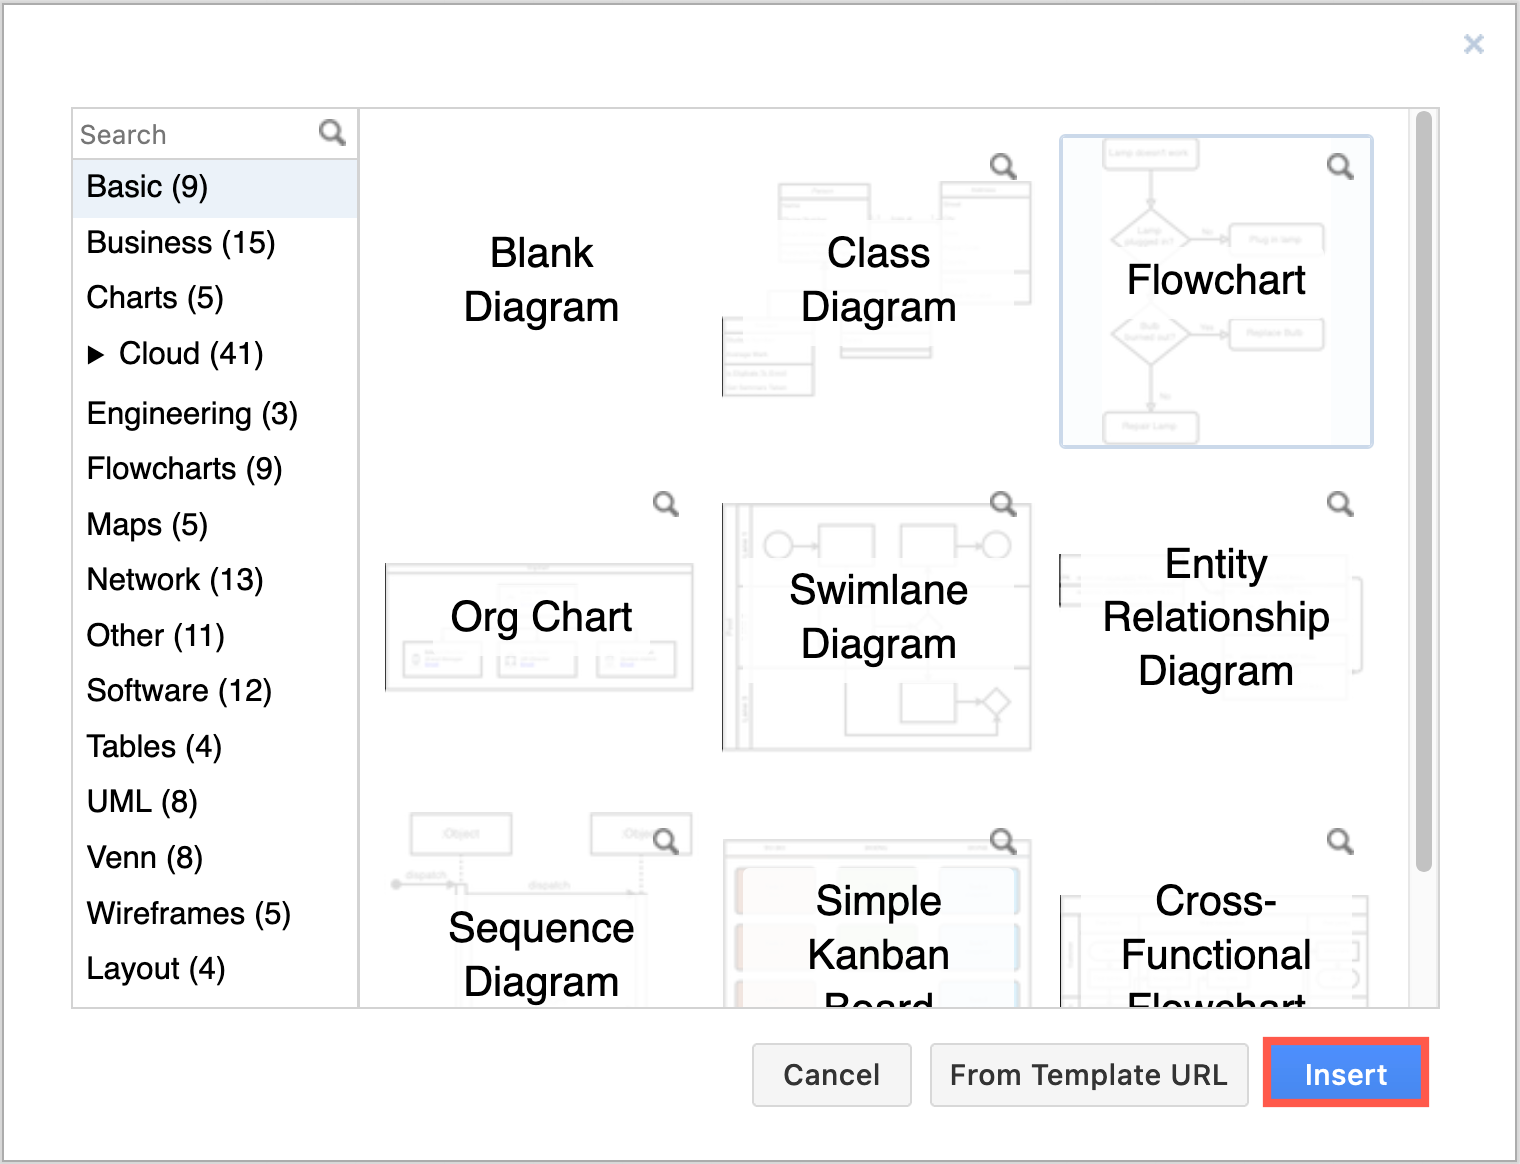 Select a template to insert into your diagram